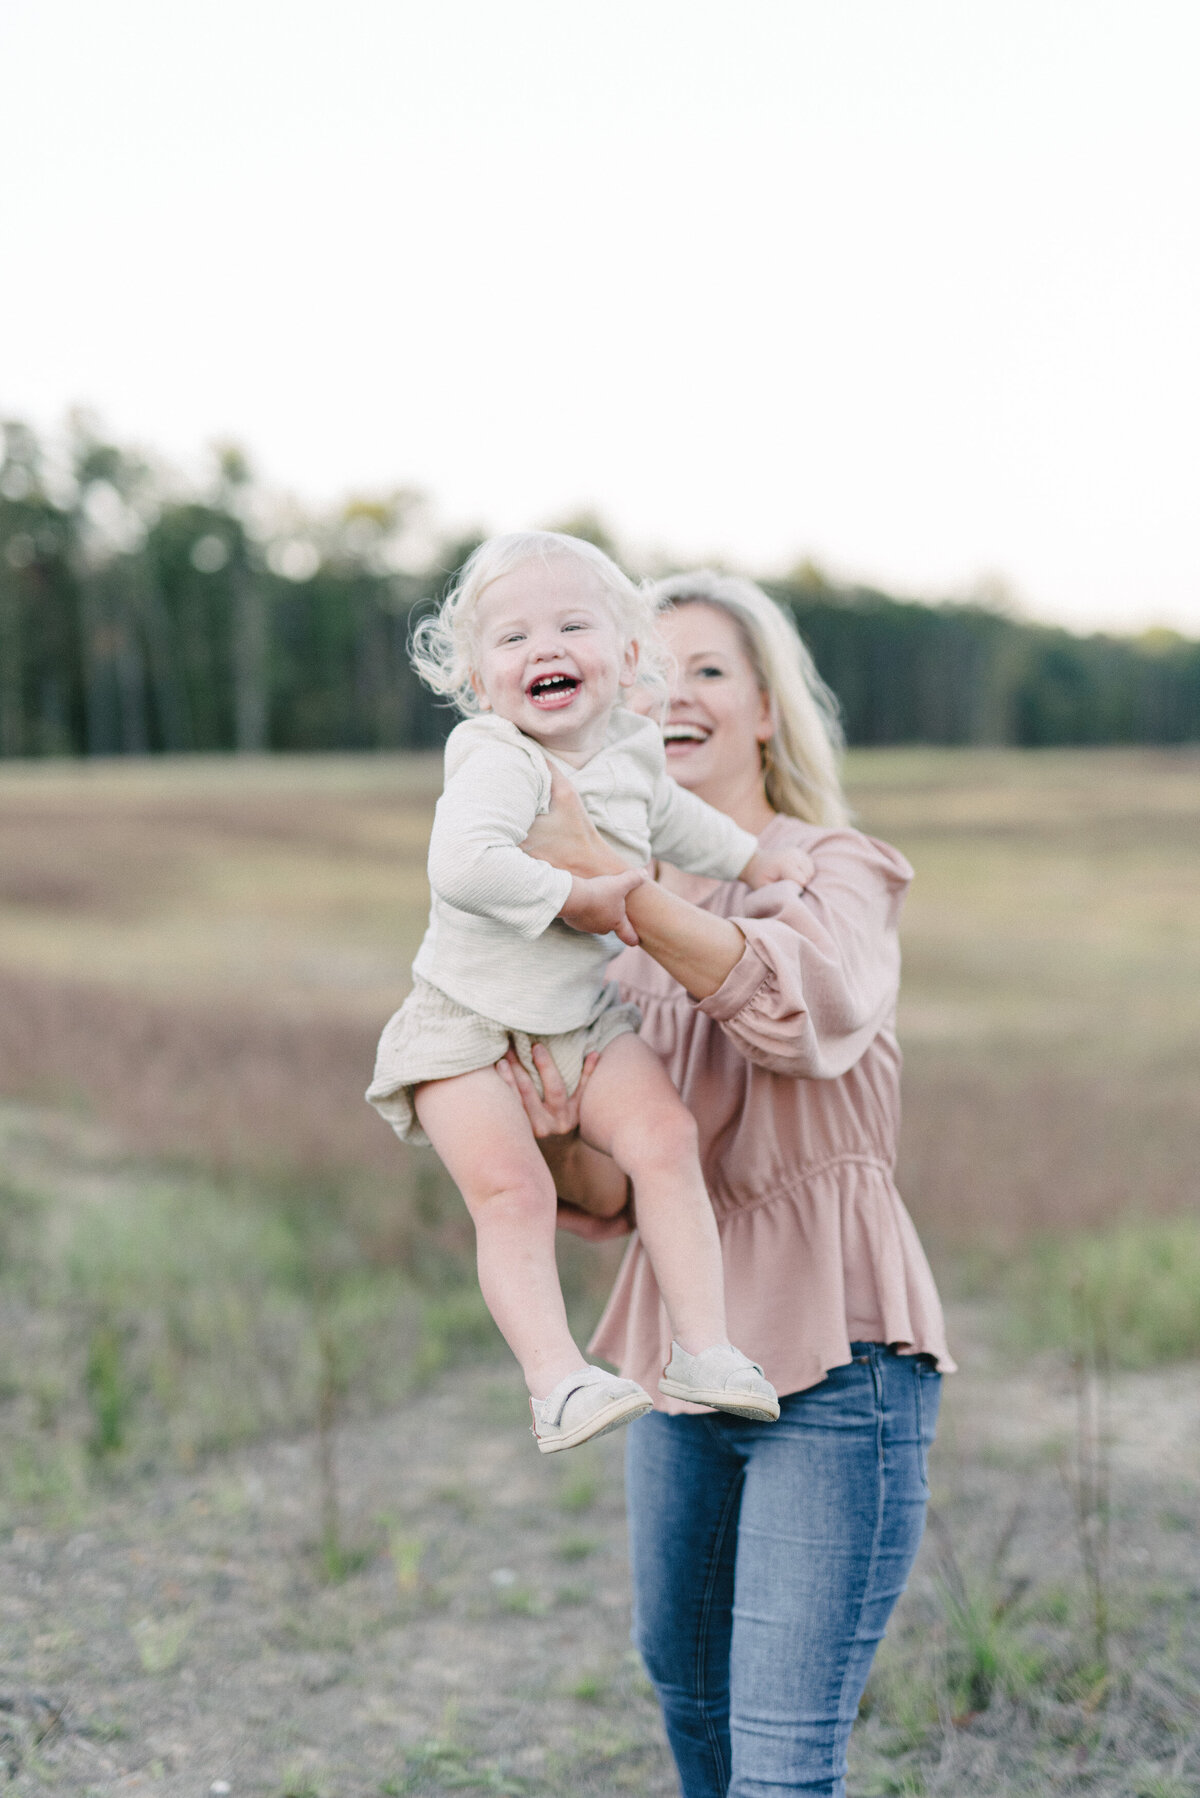 Sweet candid family photography in Hoover AL